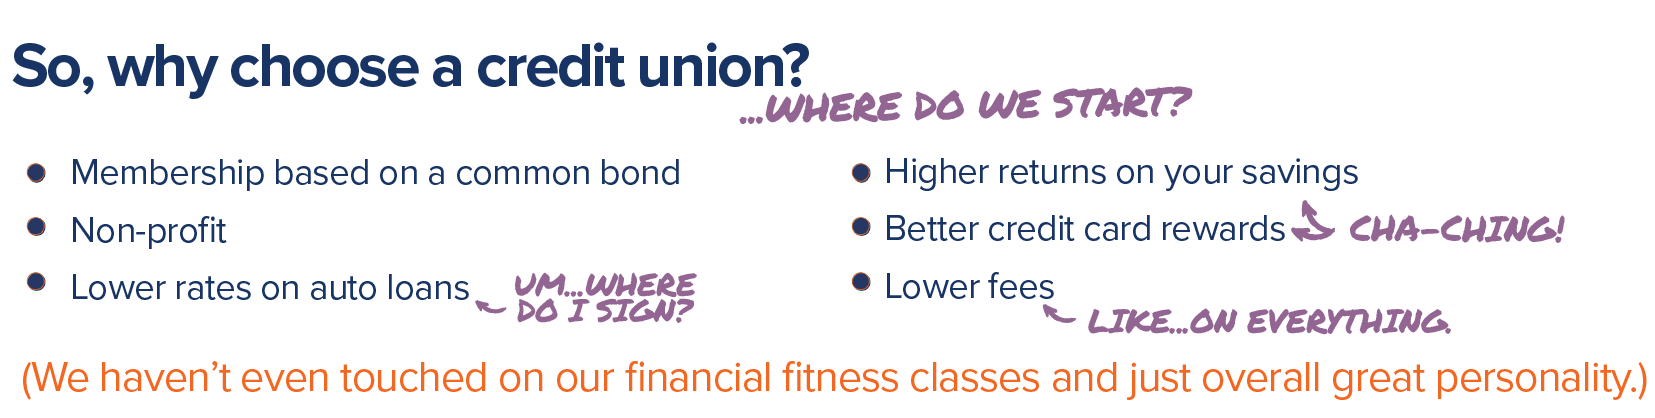 Why choose a credit union? Membership based on common bond, non-profit, lower rates on auto loans, higher returns on your savings, better credit card rewards, lower fees, and more!